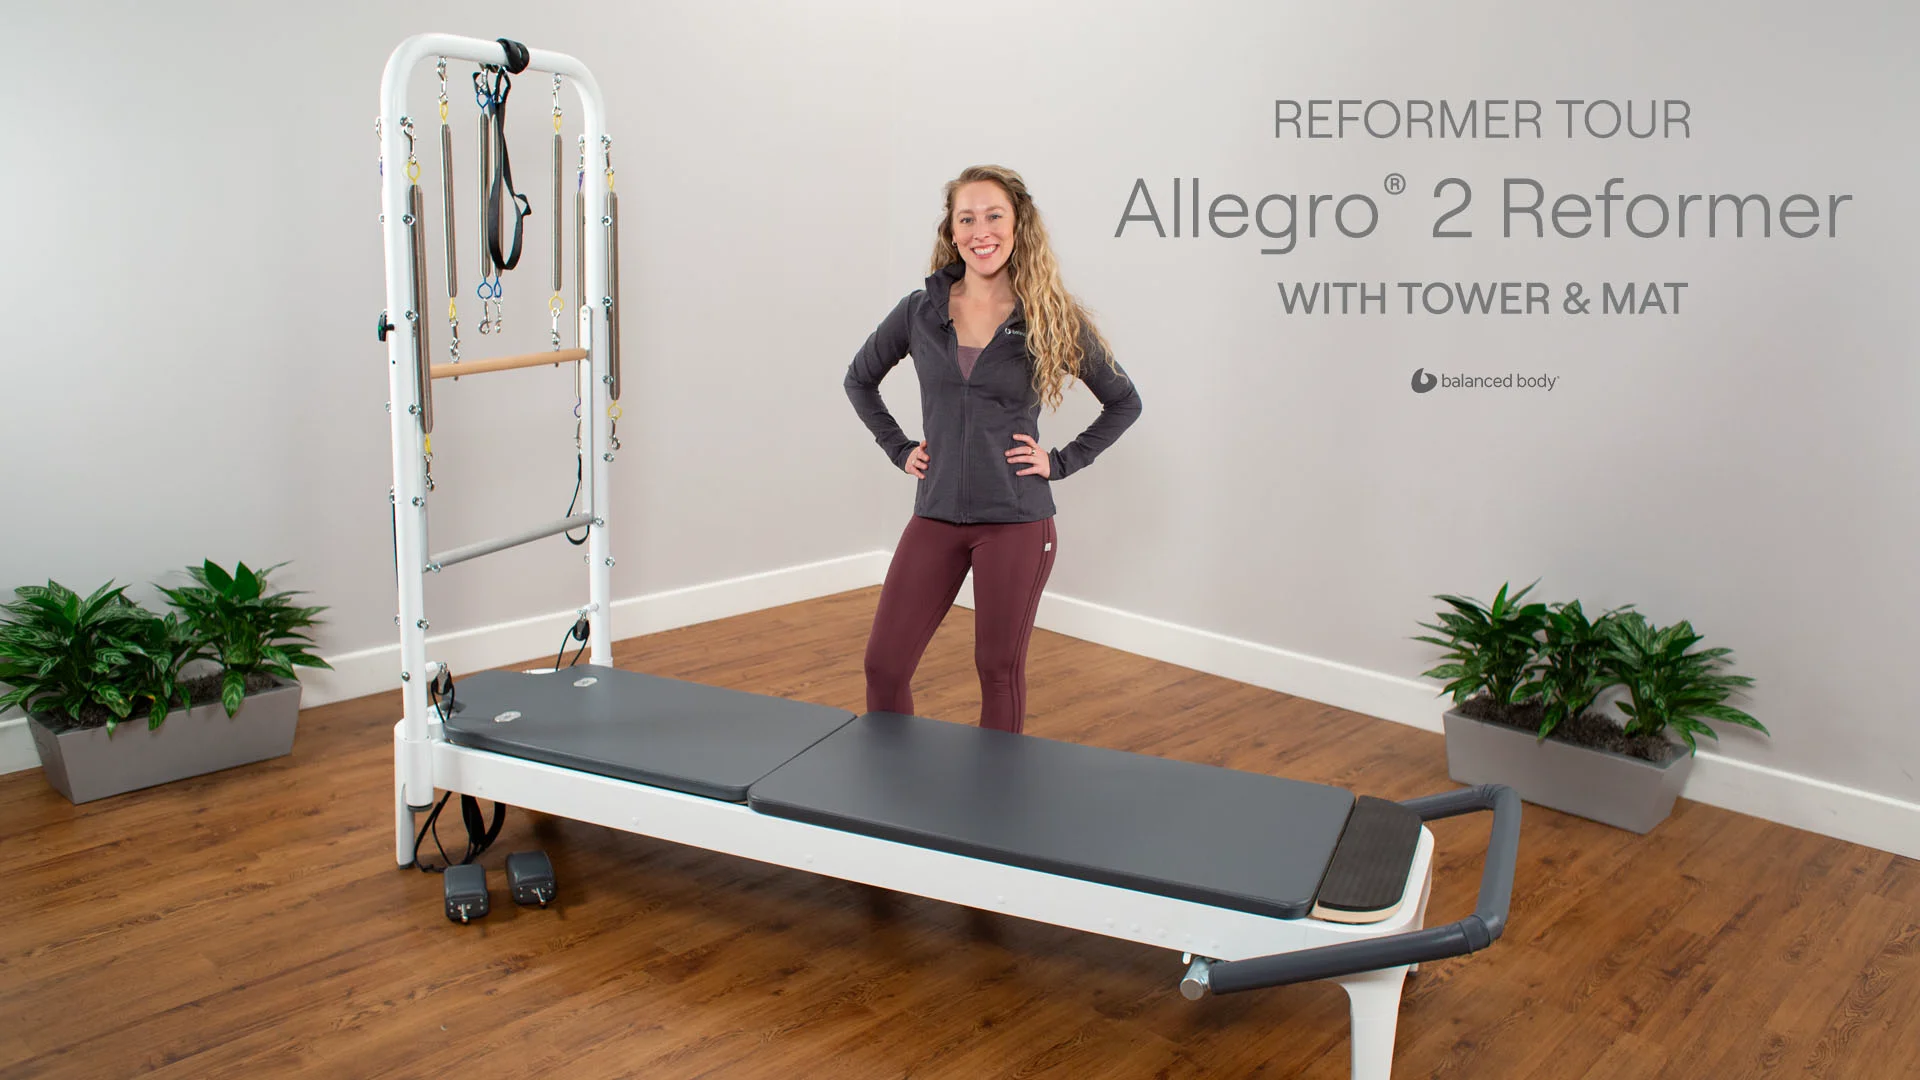 Pilates Reformer Introduction: Allegro® 2 Reformer with Mat & Tower on Vimeo